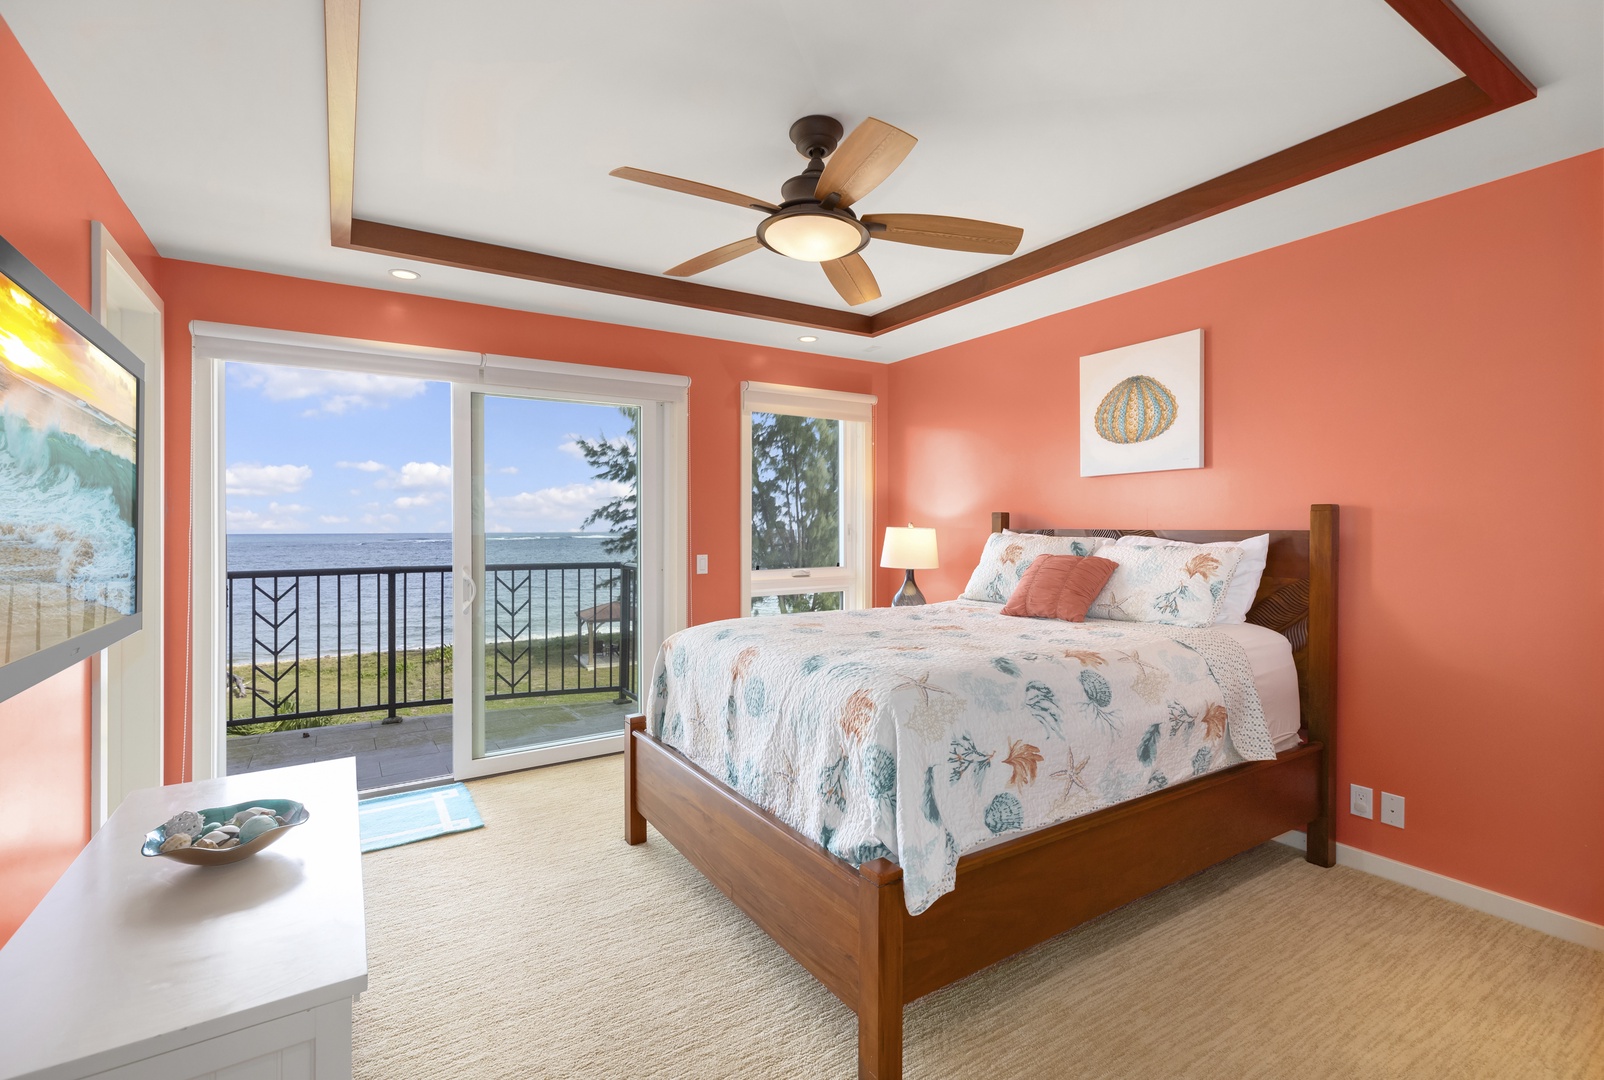 Waialua Vacation Rentals, Kala'iku Estate - The third and fourth bedrooms, which share a Jack-and-Jill bathroom, each have a double bed, lanai with mountain views, television, and desk